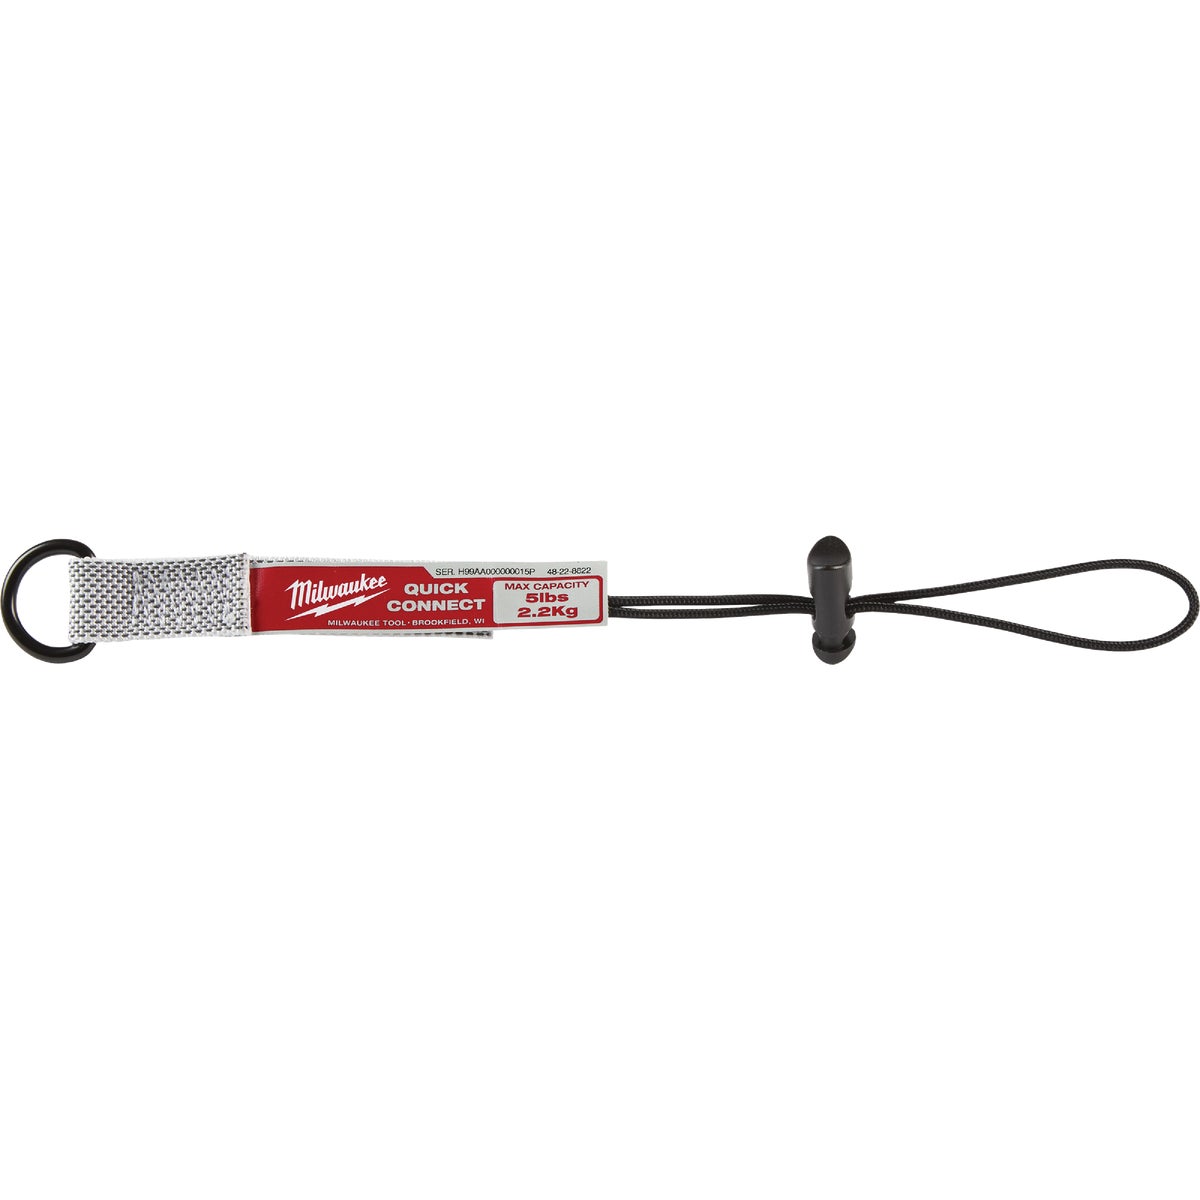 Item 377621, Quick-connect tool lanyard system is designed to help users stay safe and 